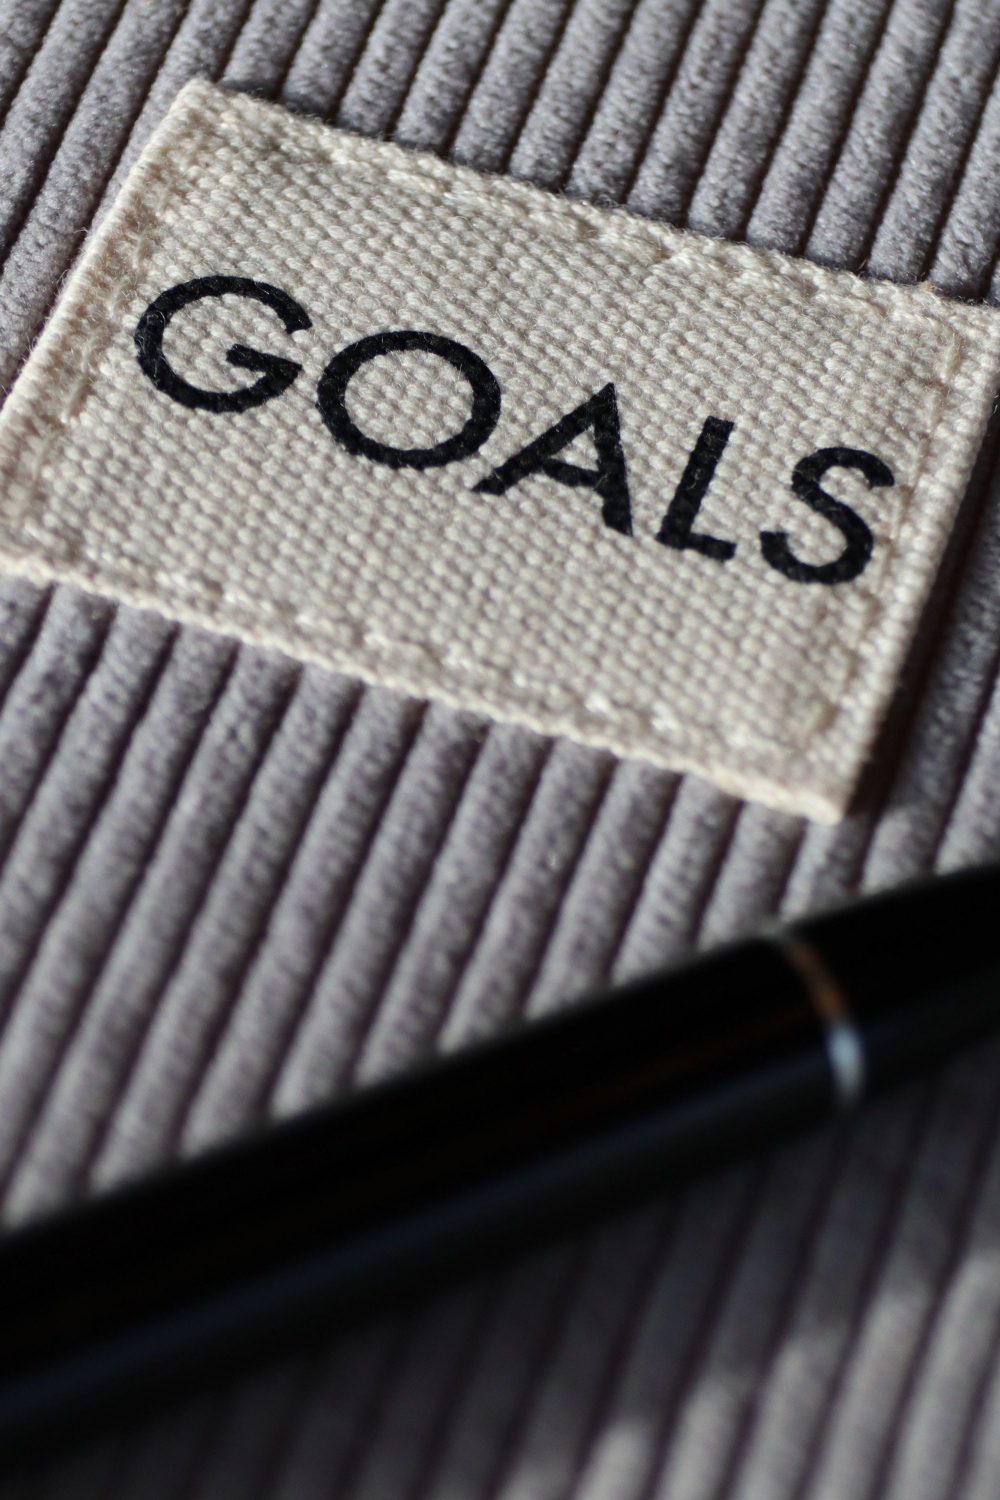 Setting Awesome Goals For Your Teen This Year